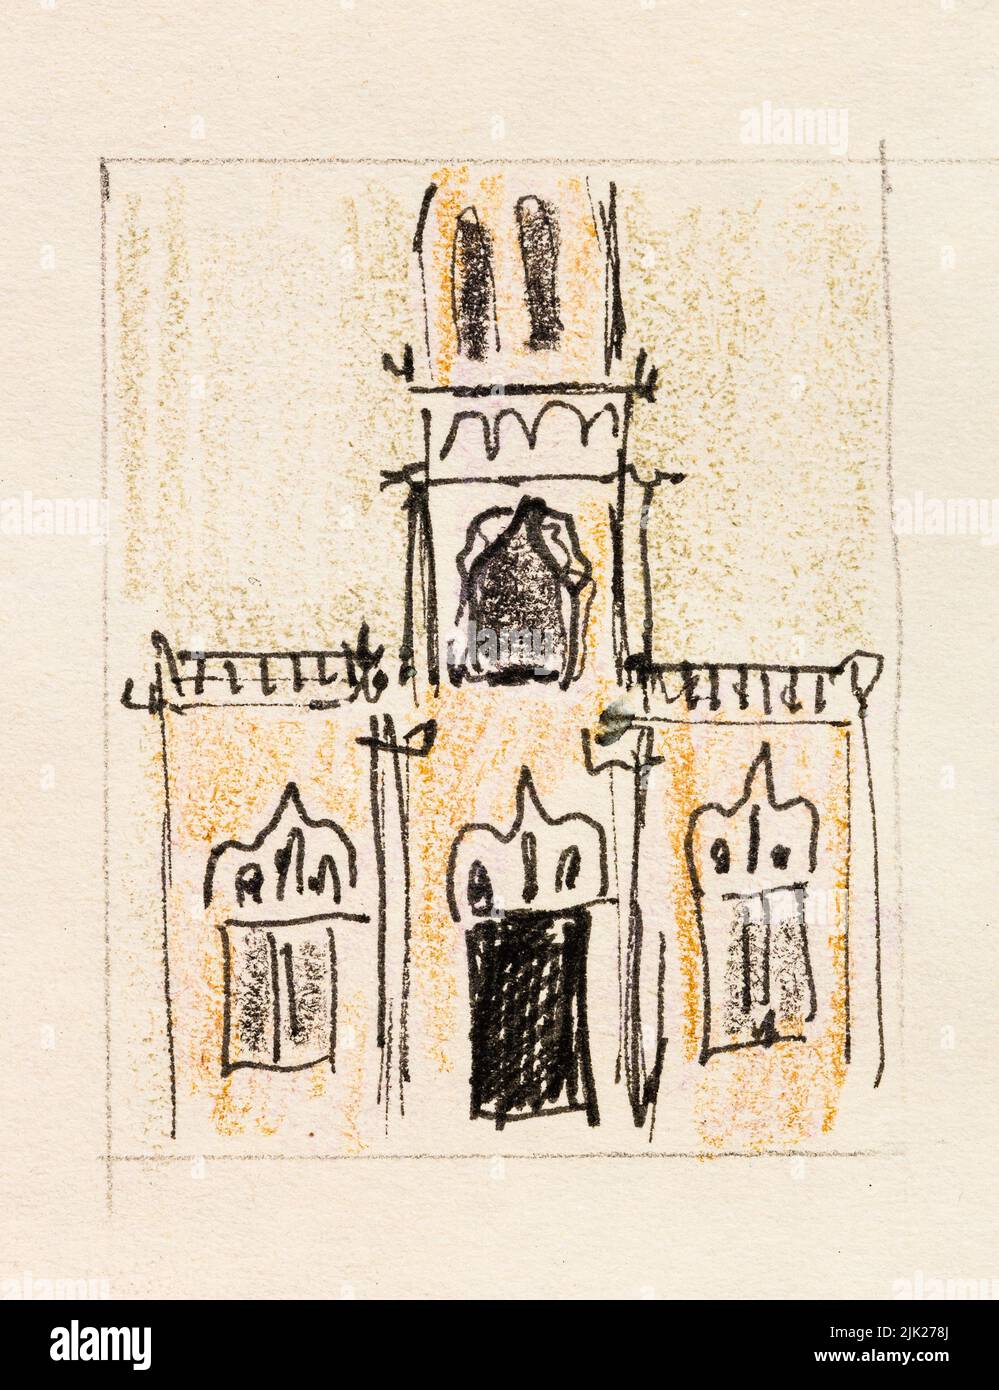 sketch of church in Moscow city hand-drawn with color pencils and black pen on old yellow colored textured paper close up Stock Photo